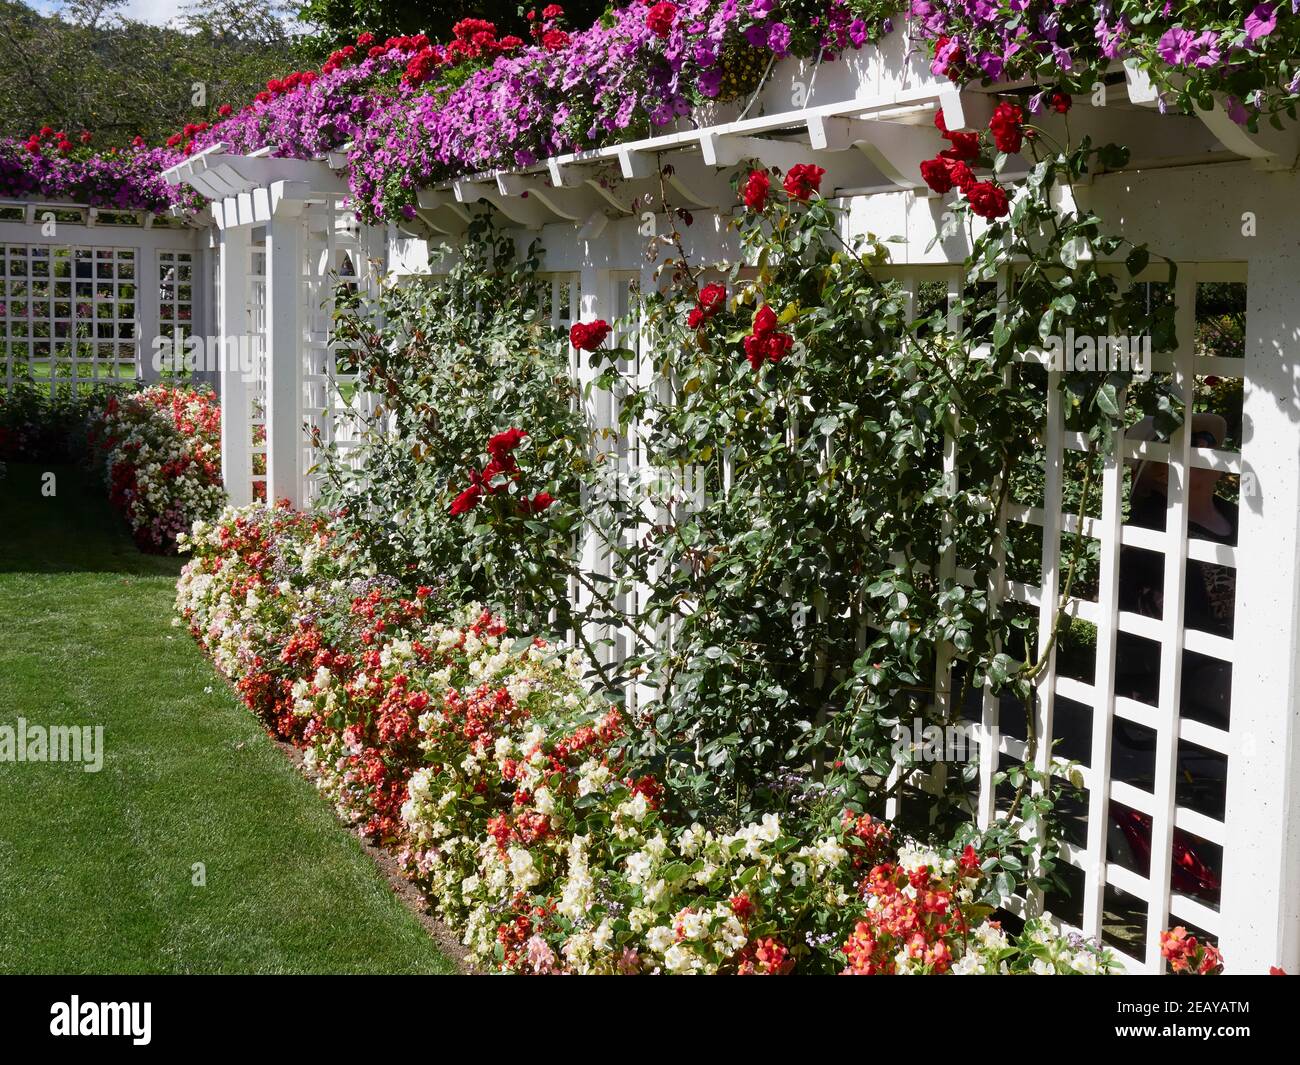 Butchart Gardens, the former Butchart residence. Petunias top the arbor surrounding the enclosed garden while roses climb the walls. Stock Photo